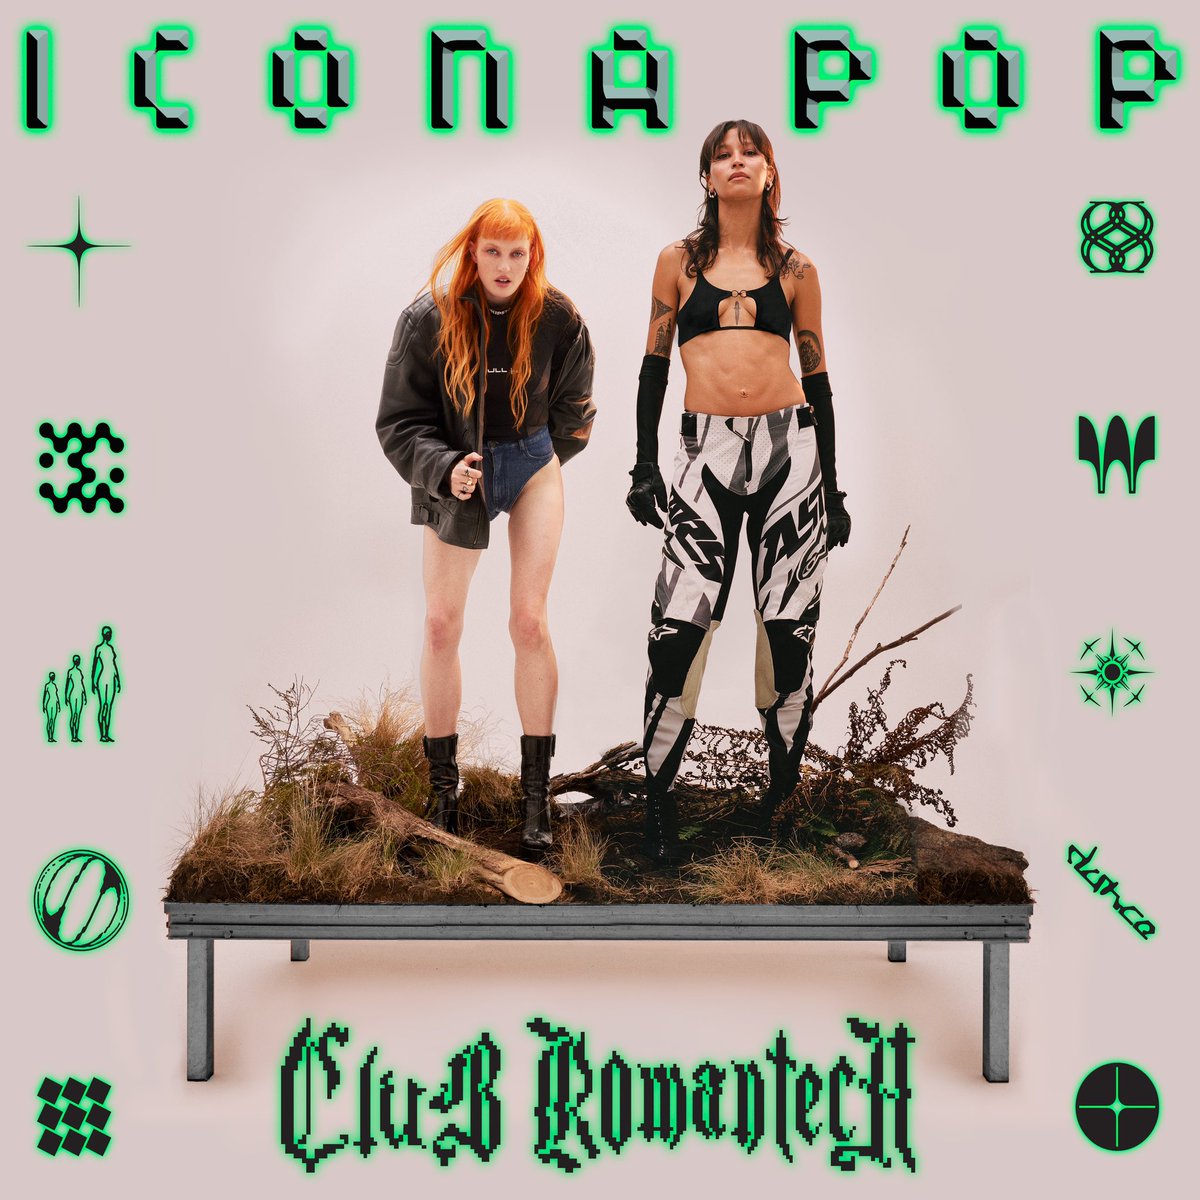 CLUB ROMANTECH. THE ALBUM. DROPPING SEPT 1. ICONS! It’s finally time to give you a date for our baby CLUB ROMANTECH … the new album is finally all done 🤭 We’re sooo excited and can’t wait for you all to hear it. You ready? Pre save it now! Link in bio 🪩✨ #ClubRomantech